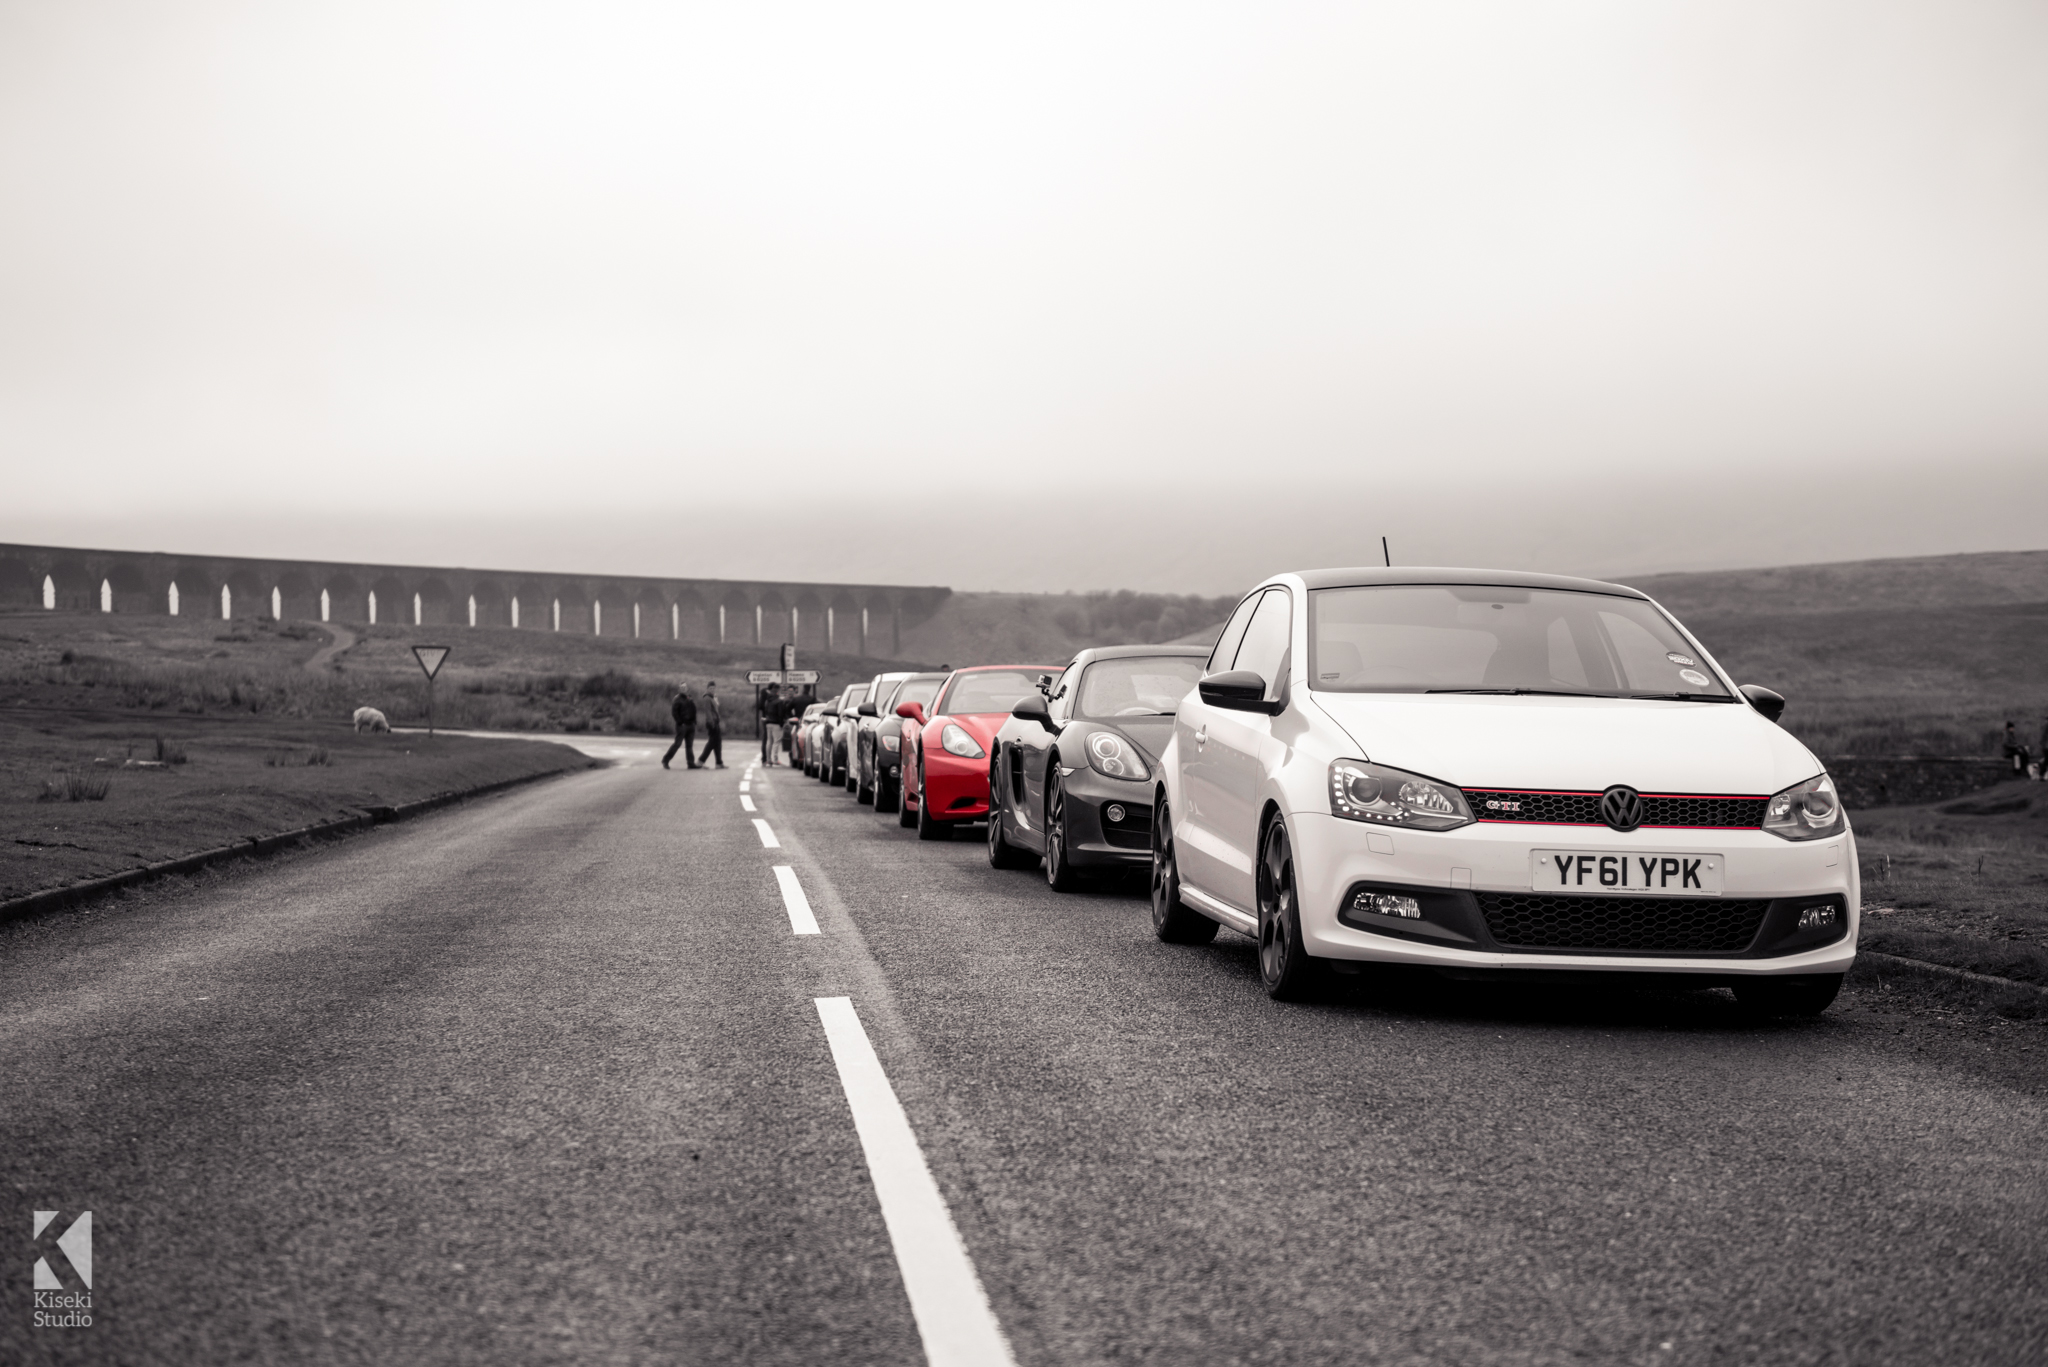 Car lined up at Ribblehead viaduct